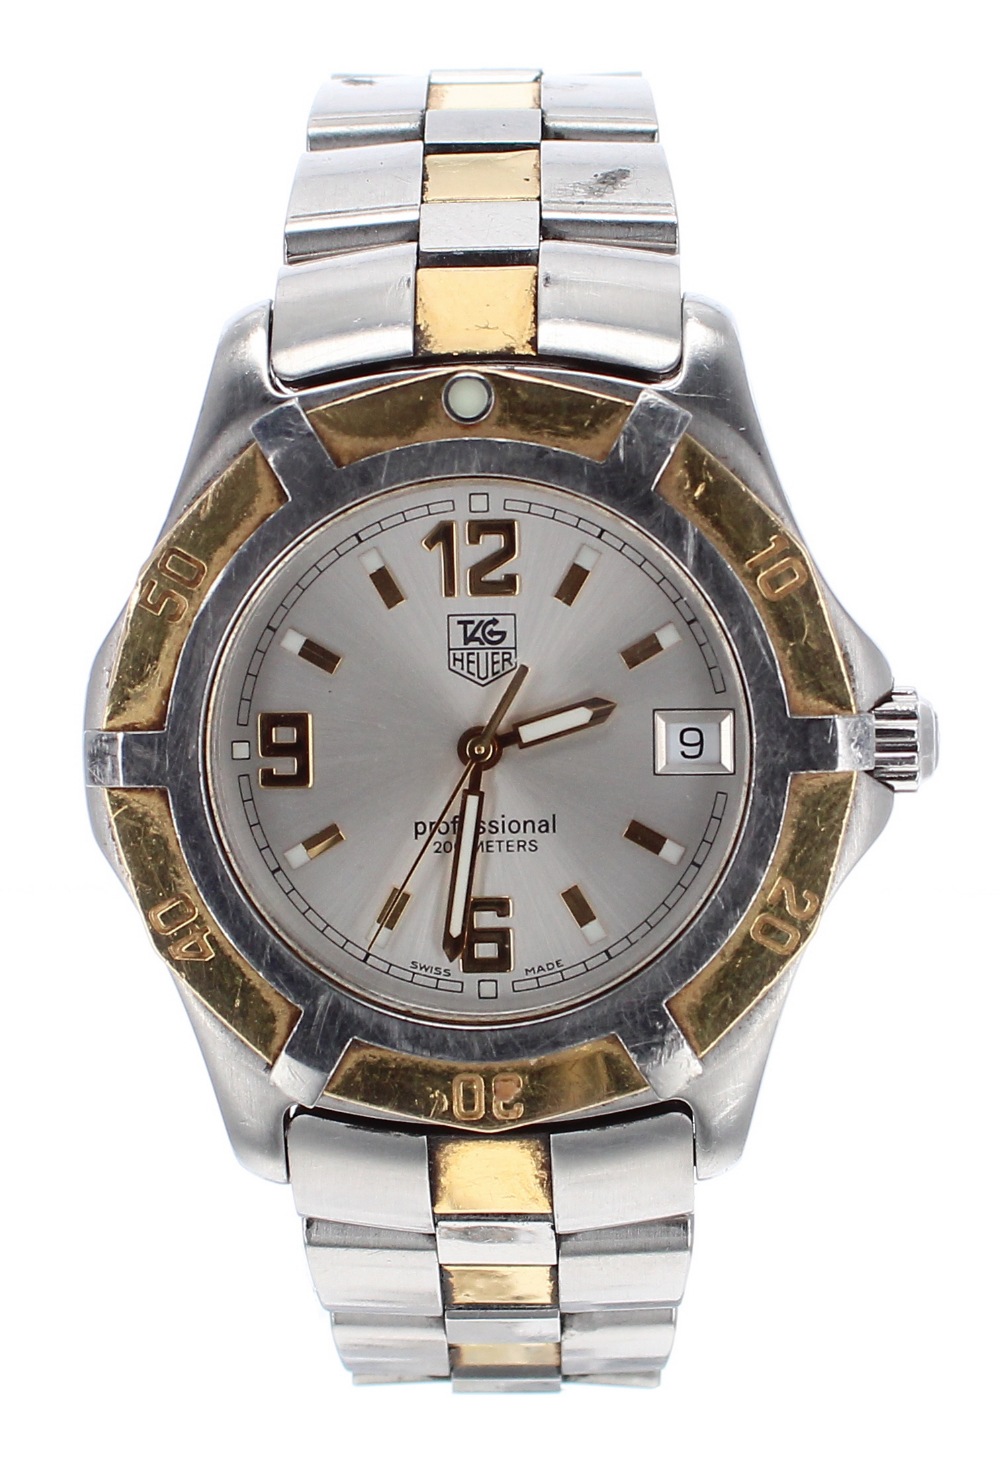 Tag Heuer 2000 Series Exclusive Professional 200m stainless steel and gold gentleman's bracelet